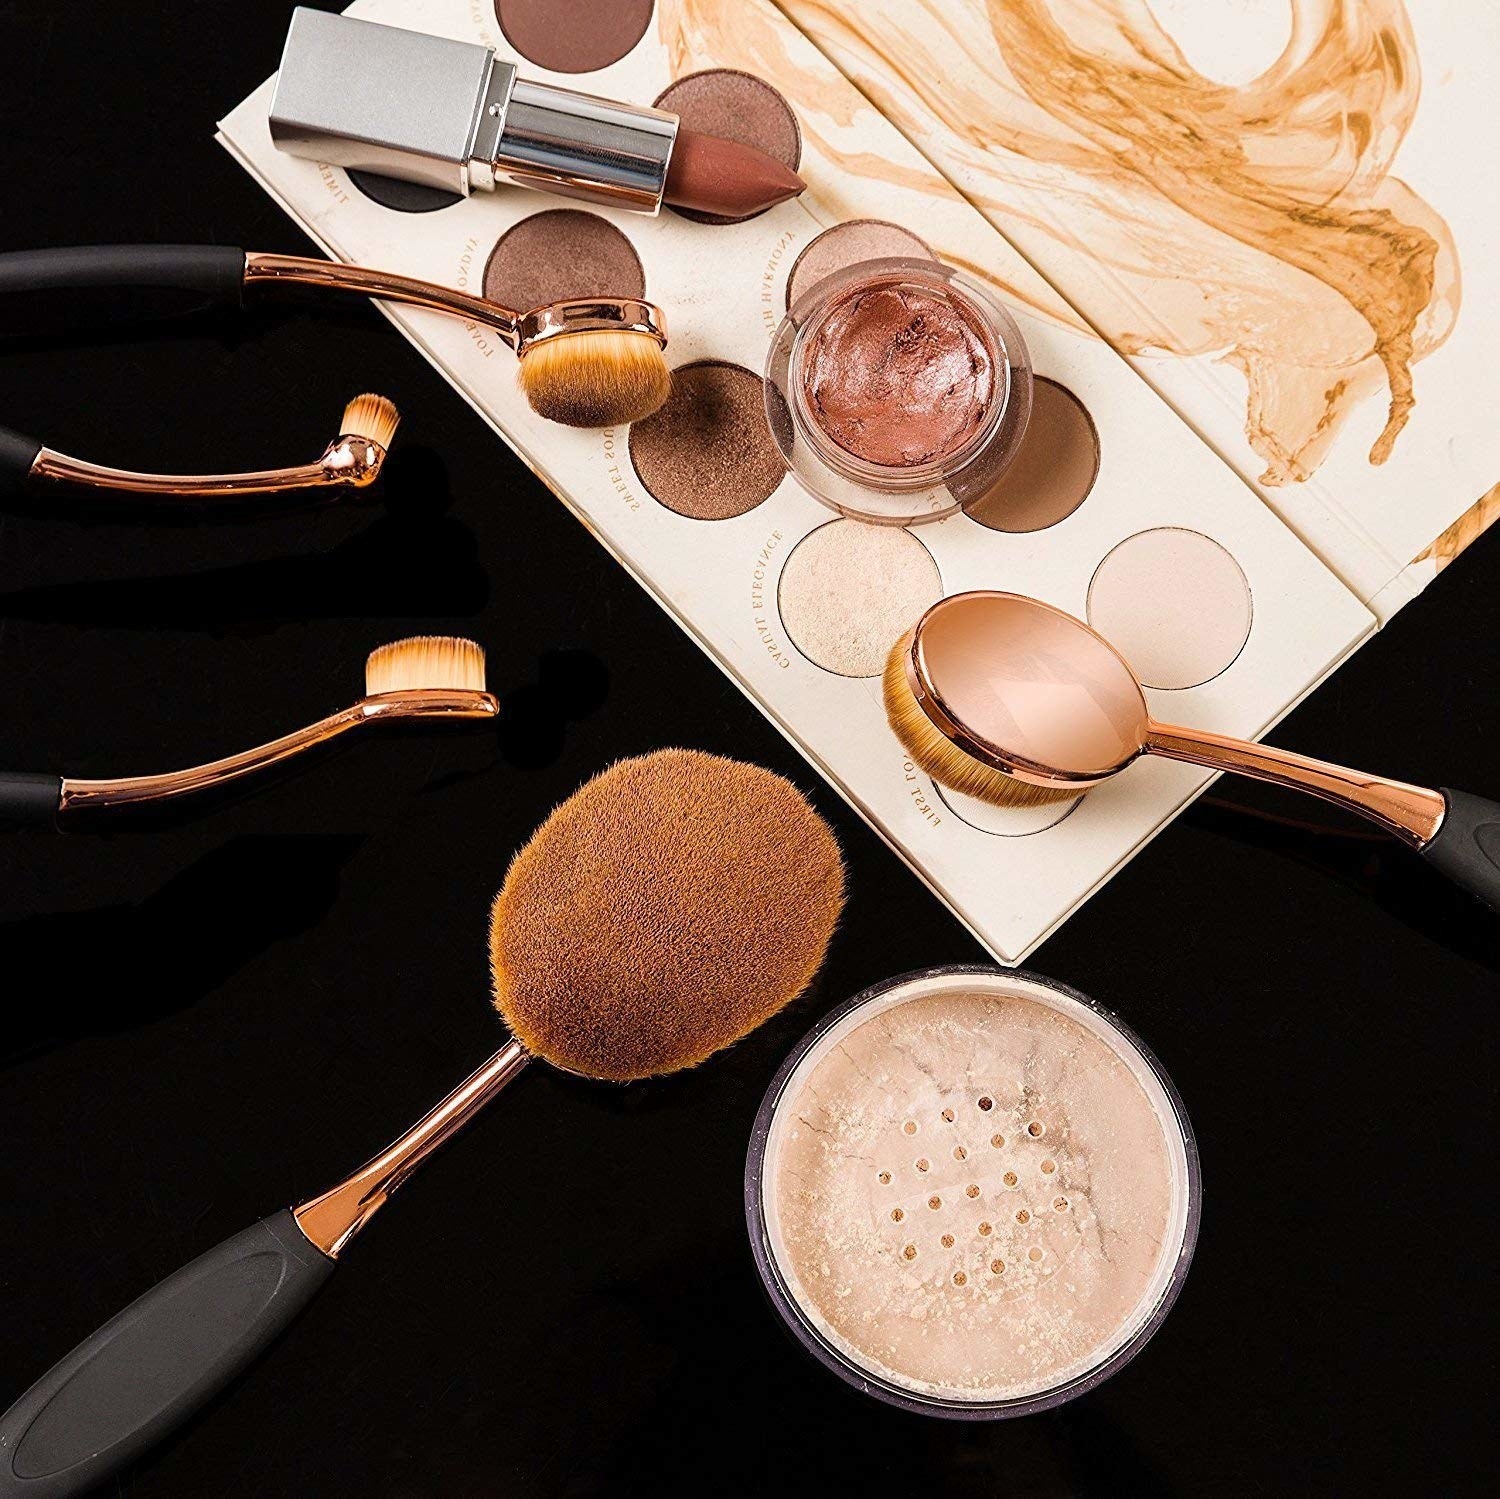 The round makeup brushes with powder, lipstick, and an eyeshadow palette